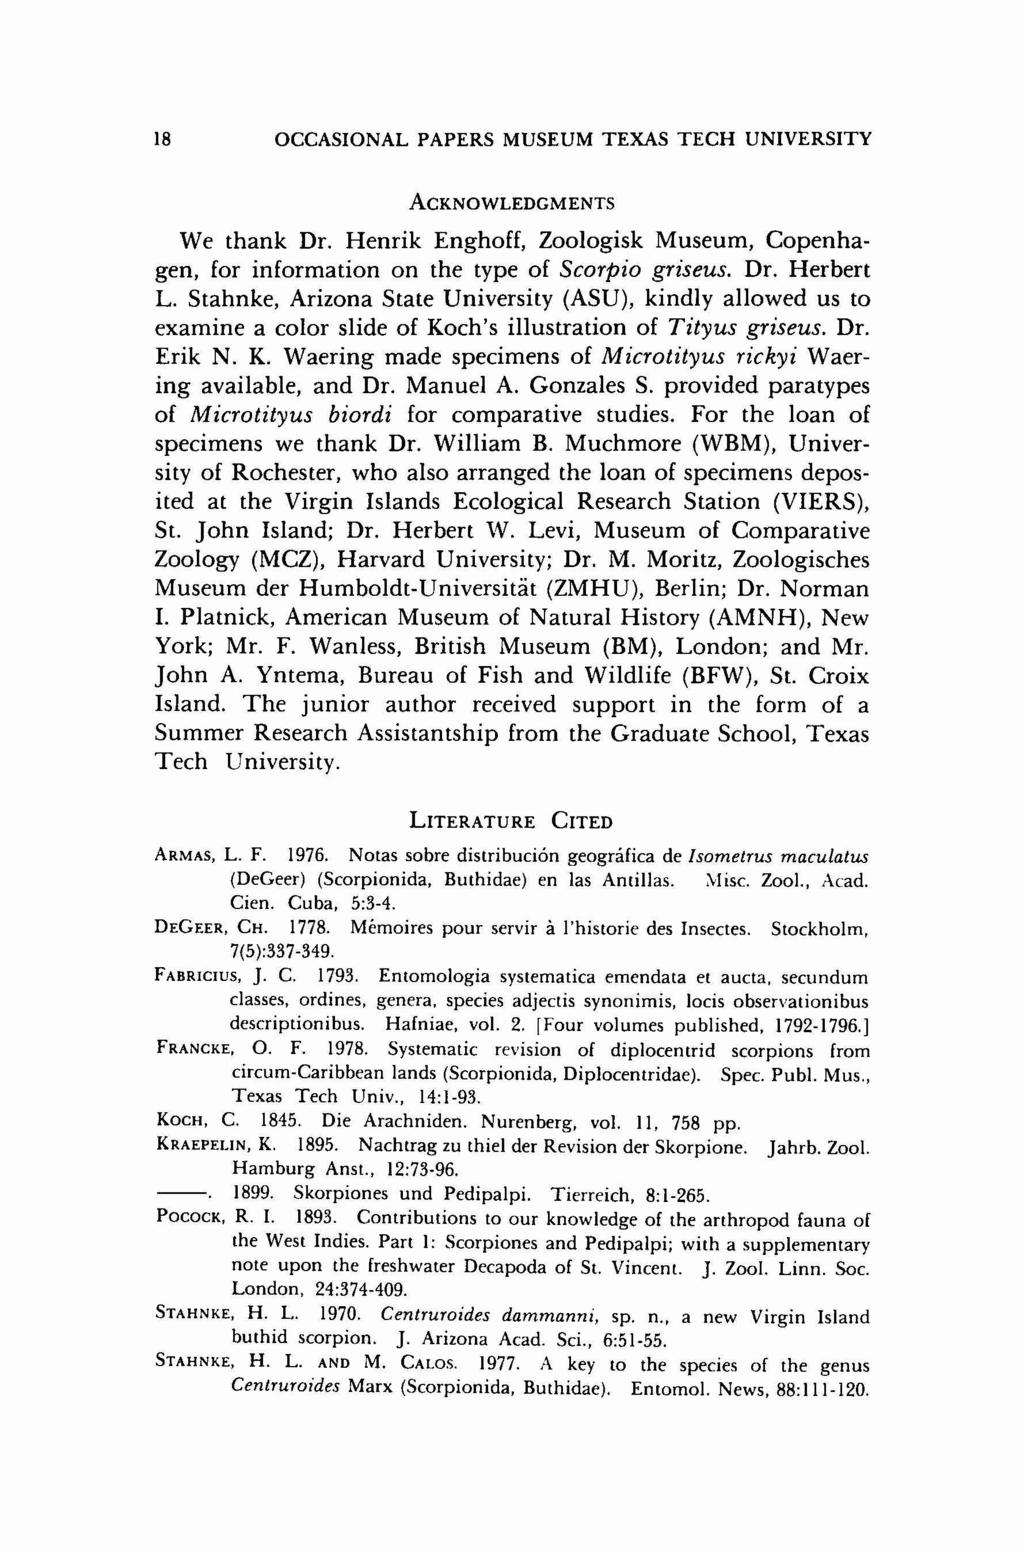 18 OCCASIONAL PAPERS MUSEUM TEXAS TECH UNIVERSITY ACKNOWLEDGMENTS We thank Dr. Henrik Enghoff, Zoologisk Museum, Copenhagen, for information on the type of Scorpio griseus. Dr. Herbert L.